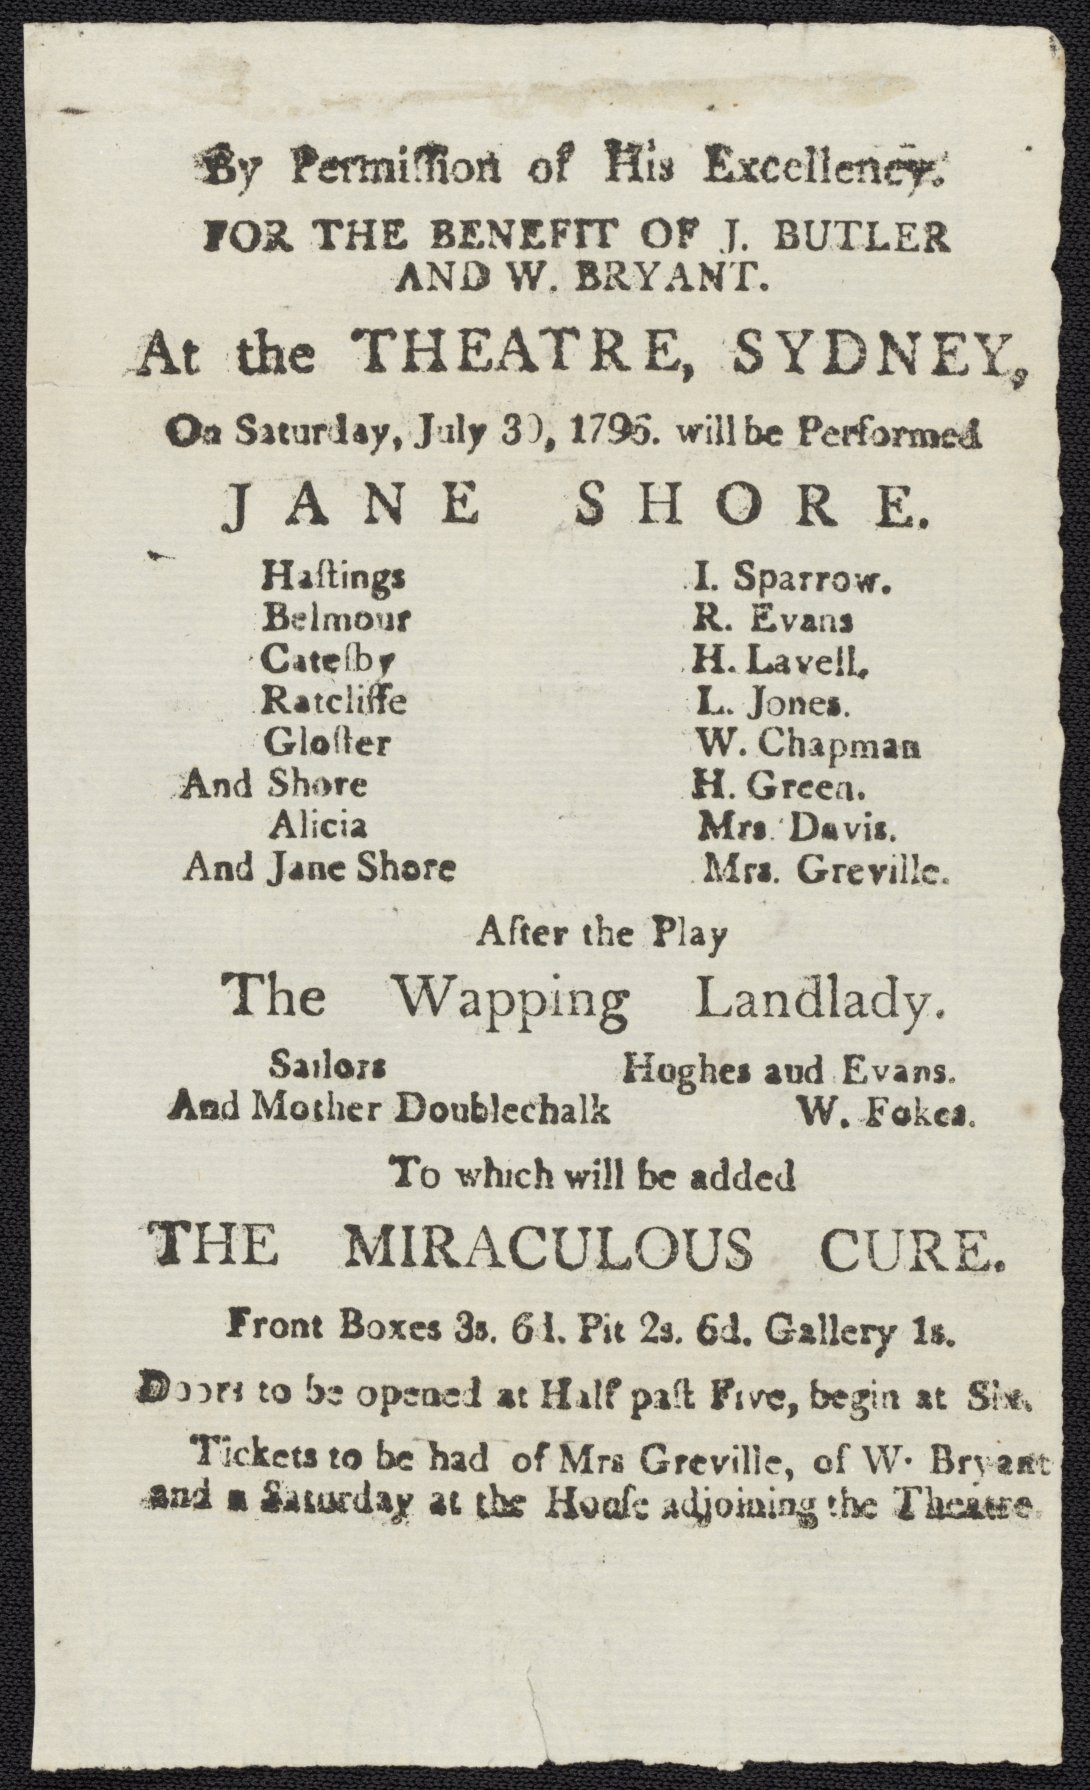 Copy of a printed playbill containing details for a performance of Jane Shore at the Sydney Theatre in 1796.